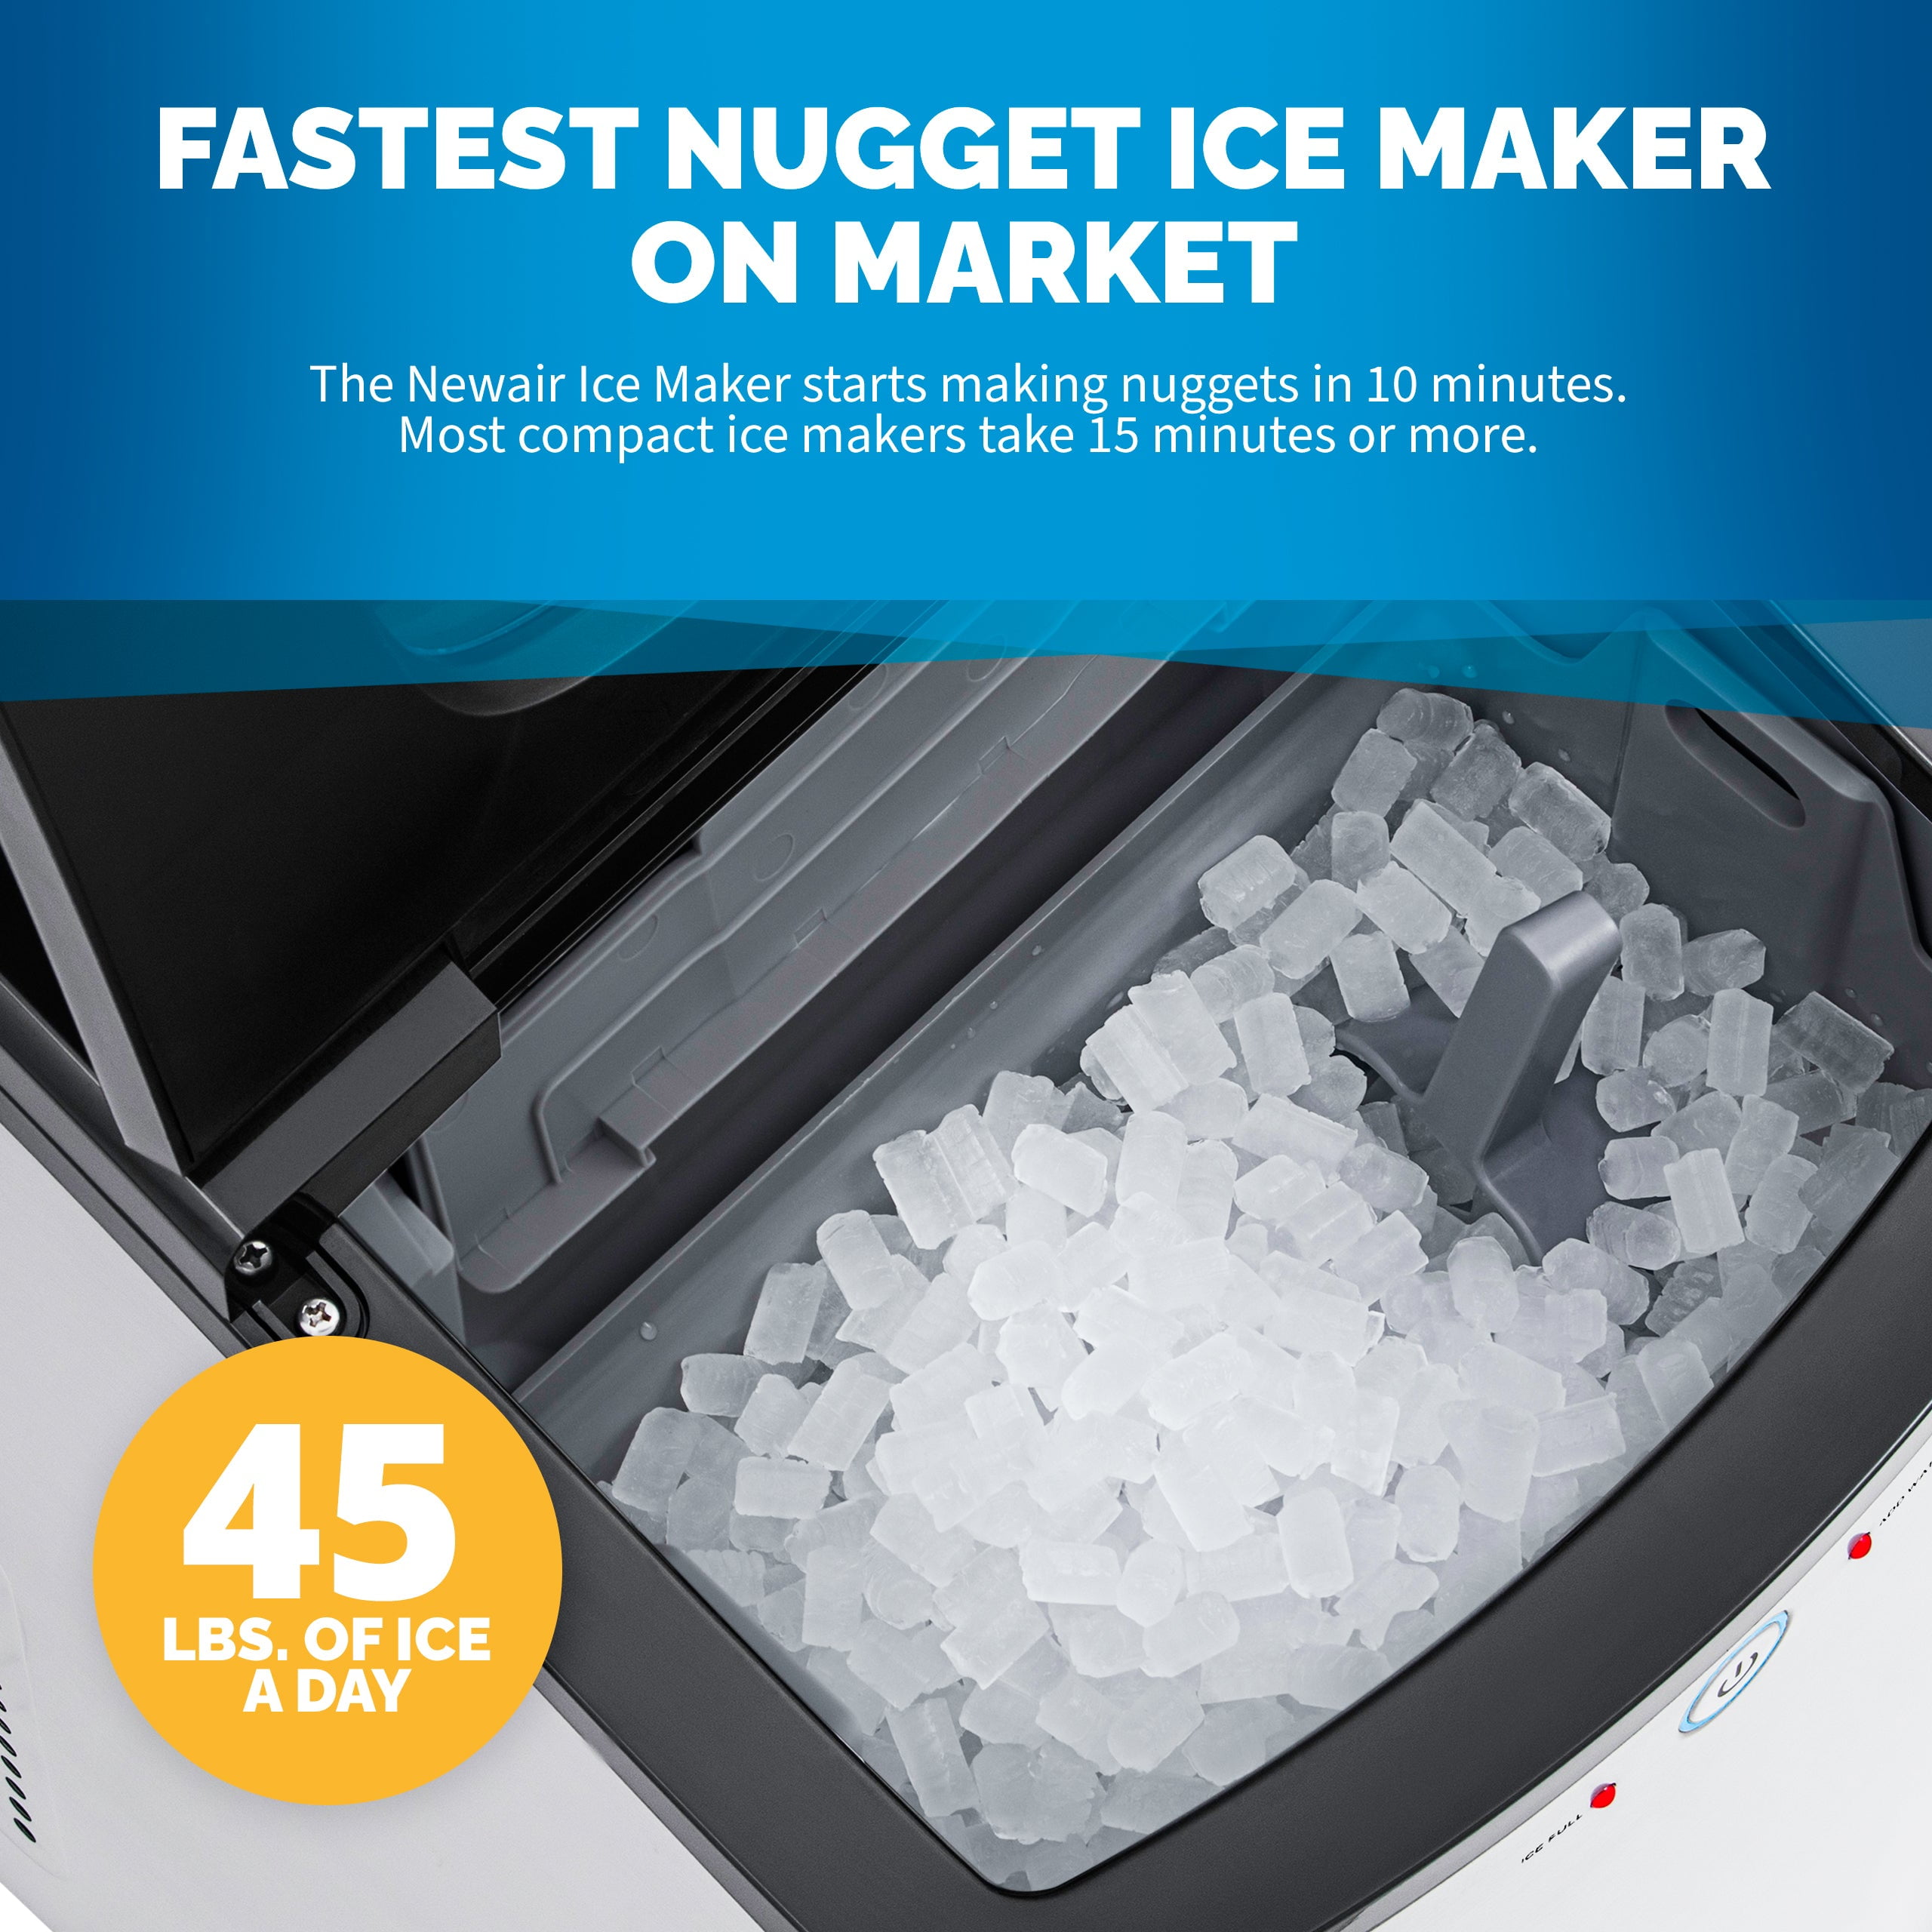 Newair 44 lbs. Nugget Countertop Ice Maker with Self-Cleaning Function,  Refillable Water Tank, Perfect for Kitchens, Offices, Home Coffee Bars, and